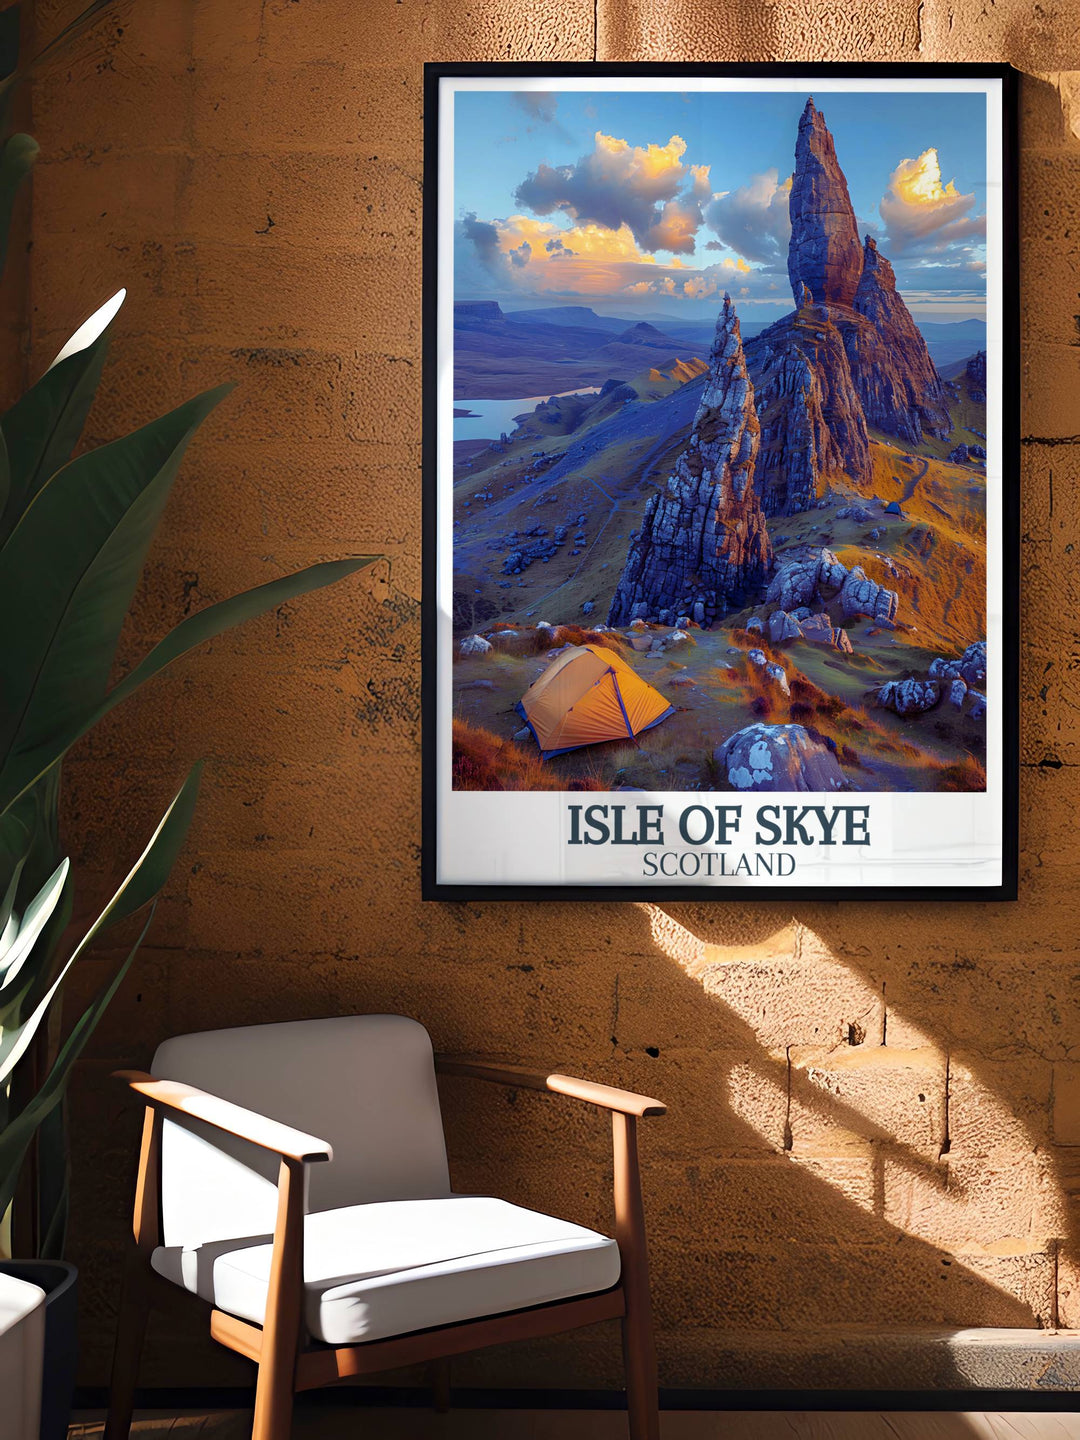 Scottish landscape poster of The Old Man of Storr ideal for gifting to lovers of iconic natural landmarks